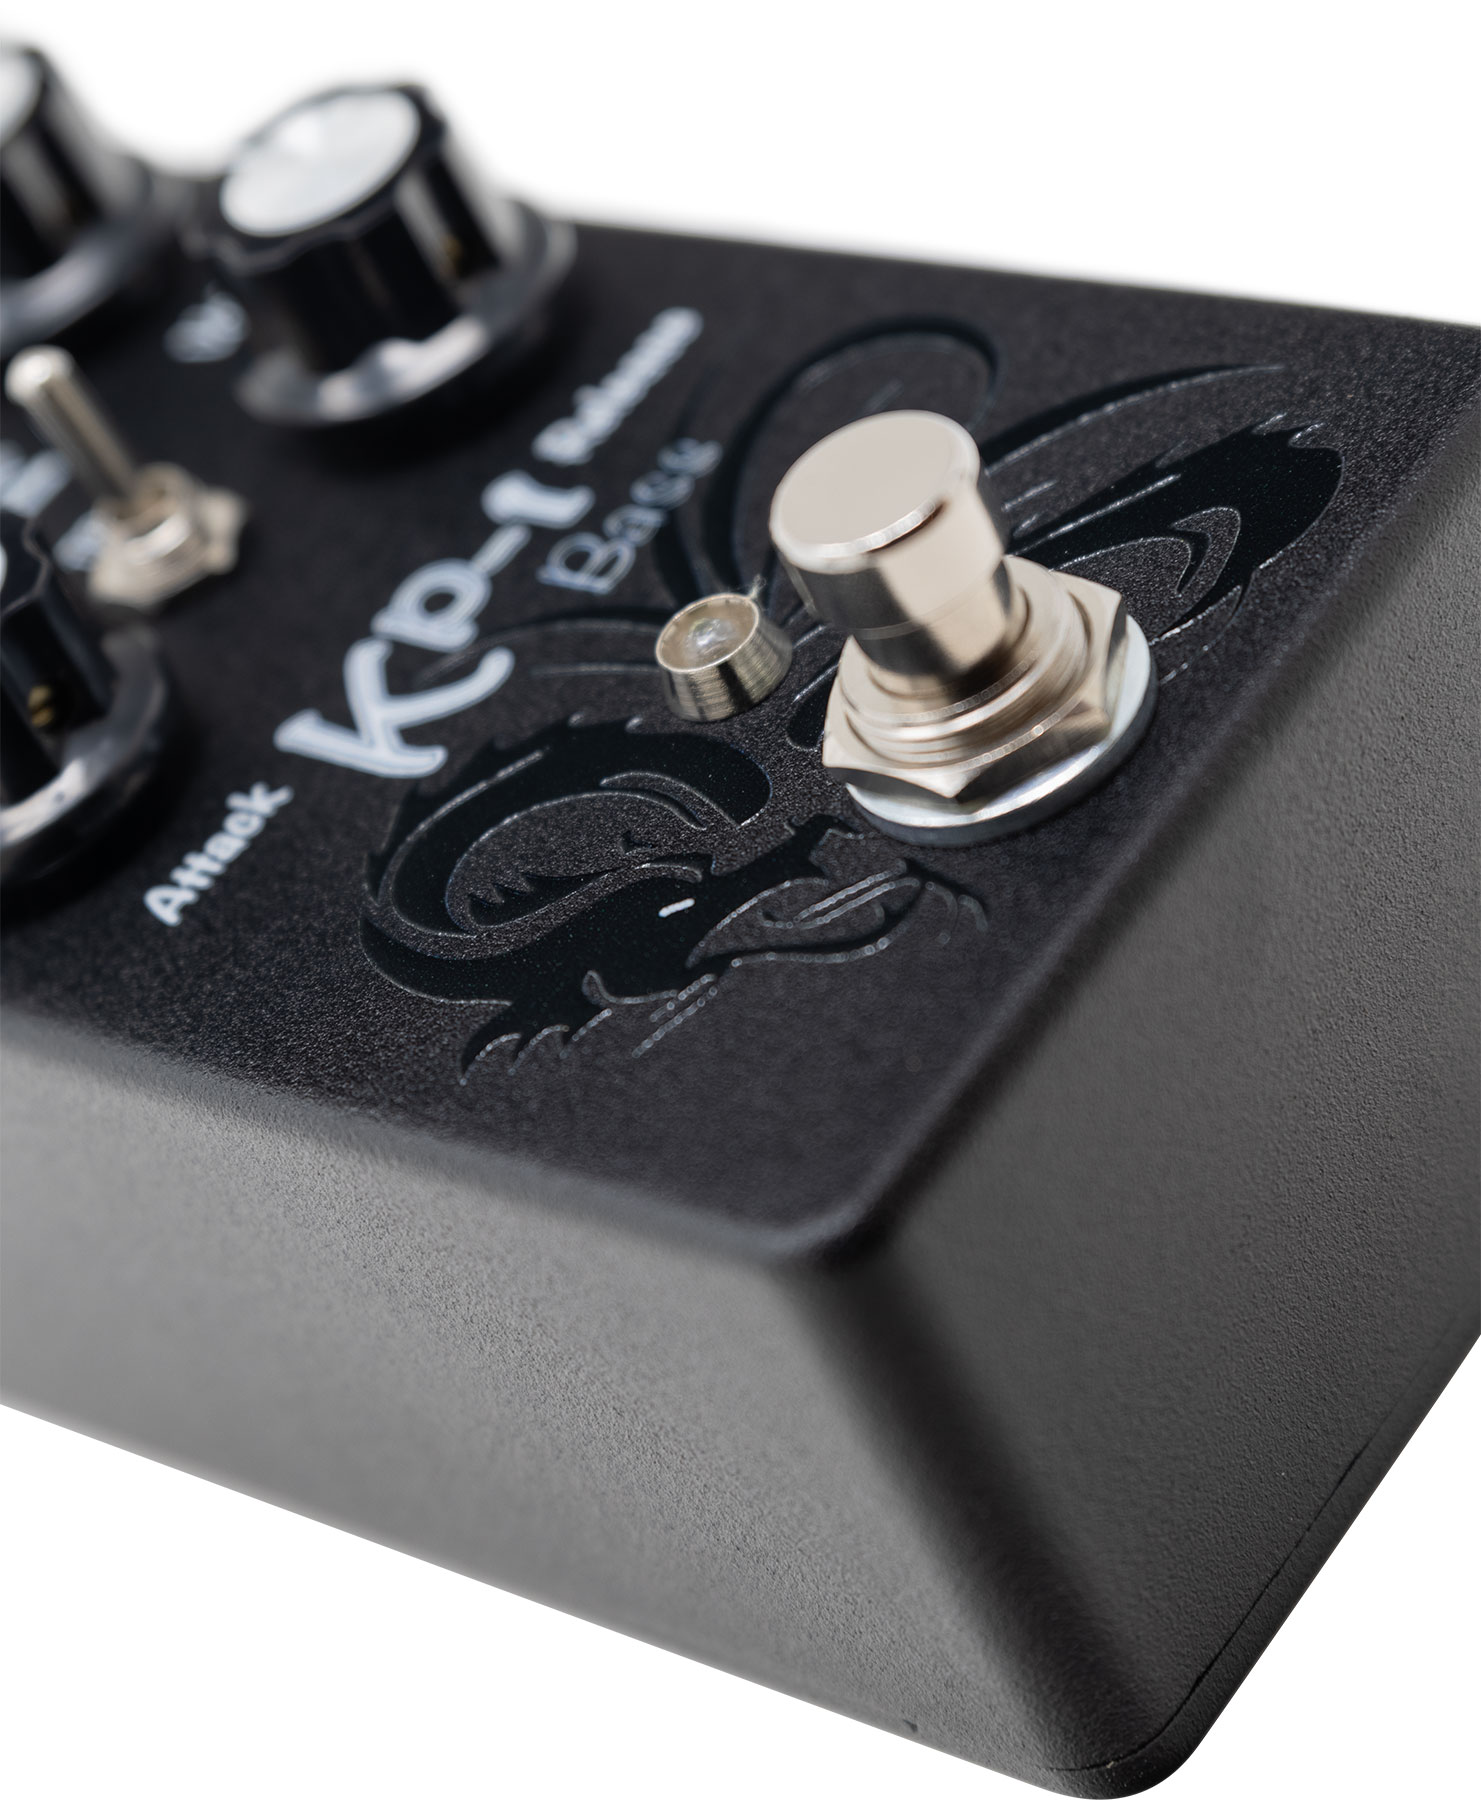 Pfx Circuits Kp-1b Bass Silent Compressor  Sustainer - Compressor, sustain & noise gate effect pedal for bass - Variation 3